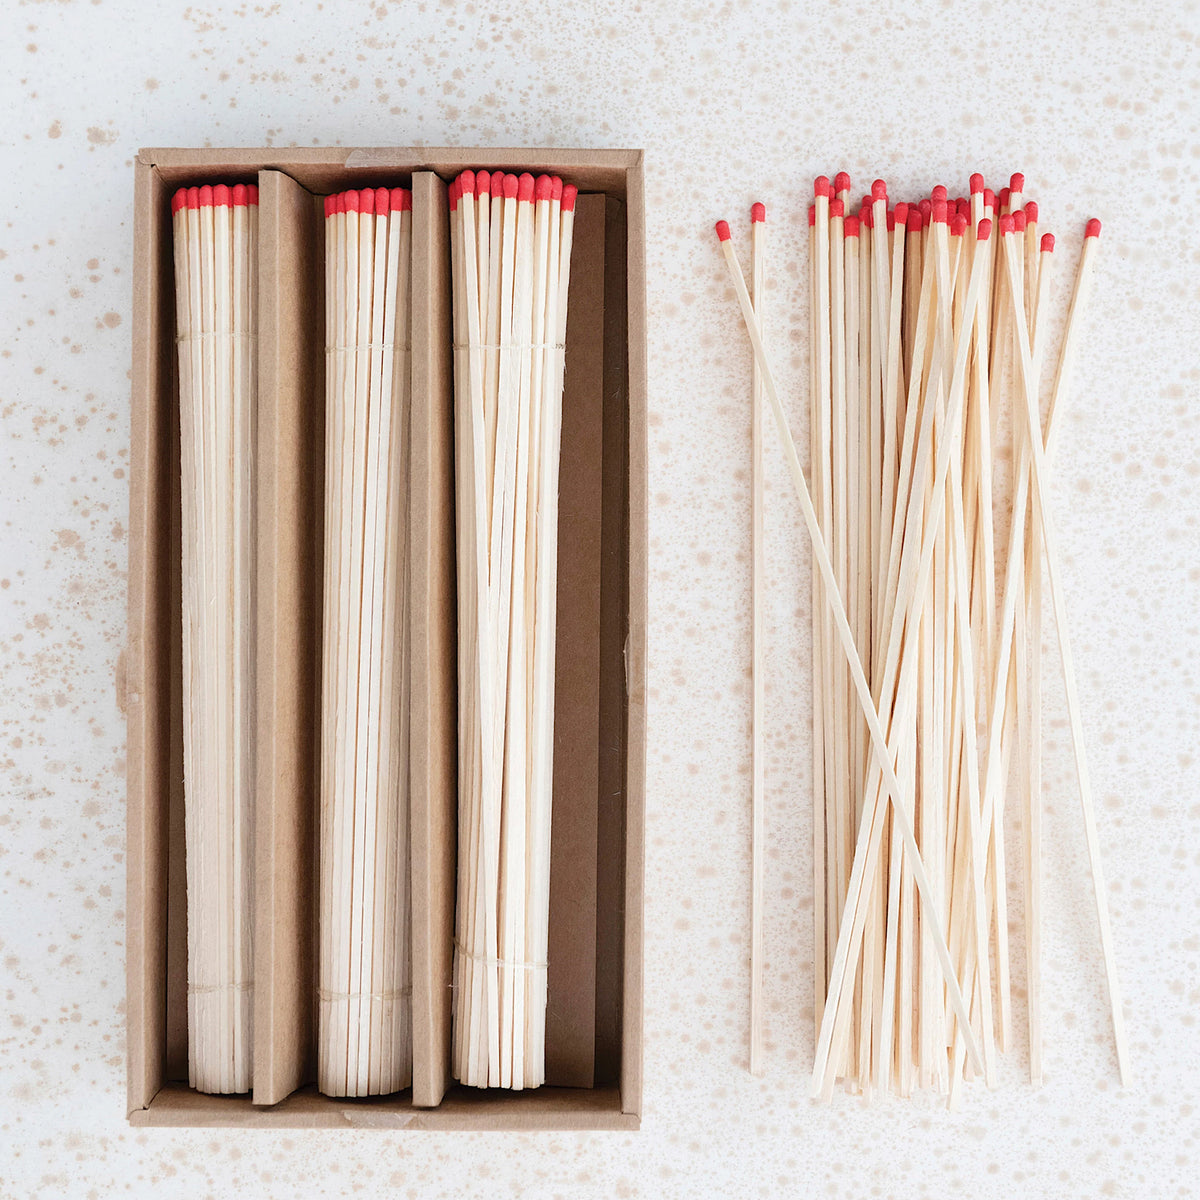 Box of Long Matches in Red